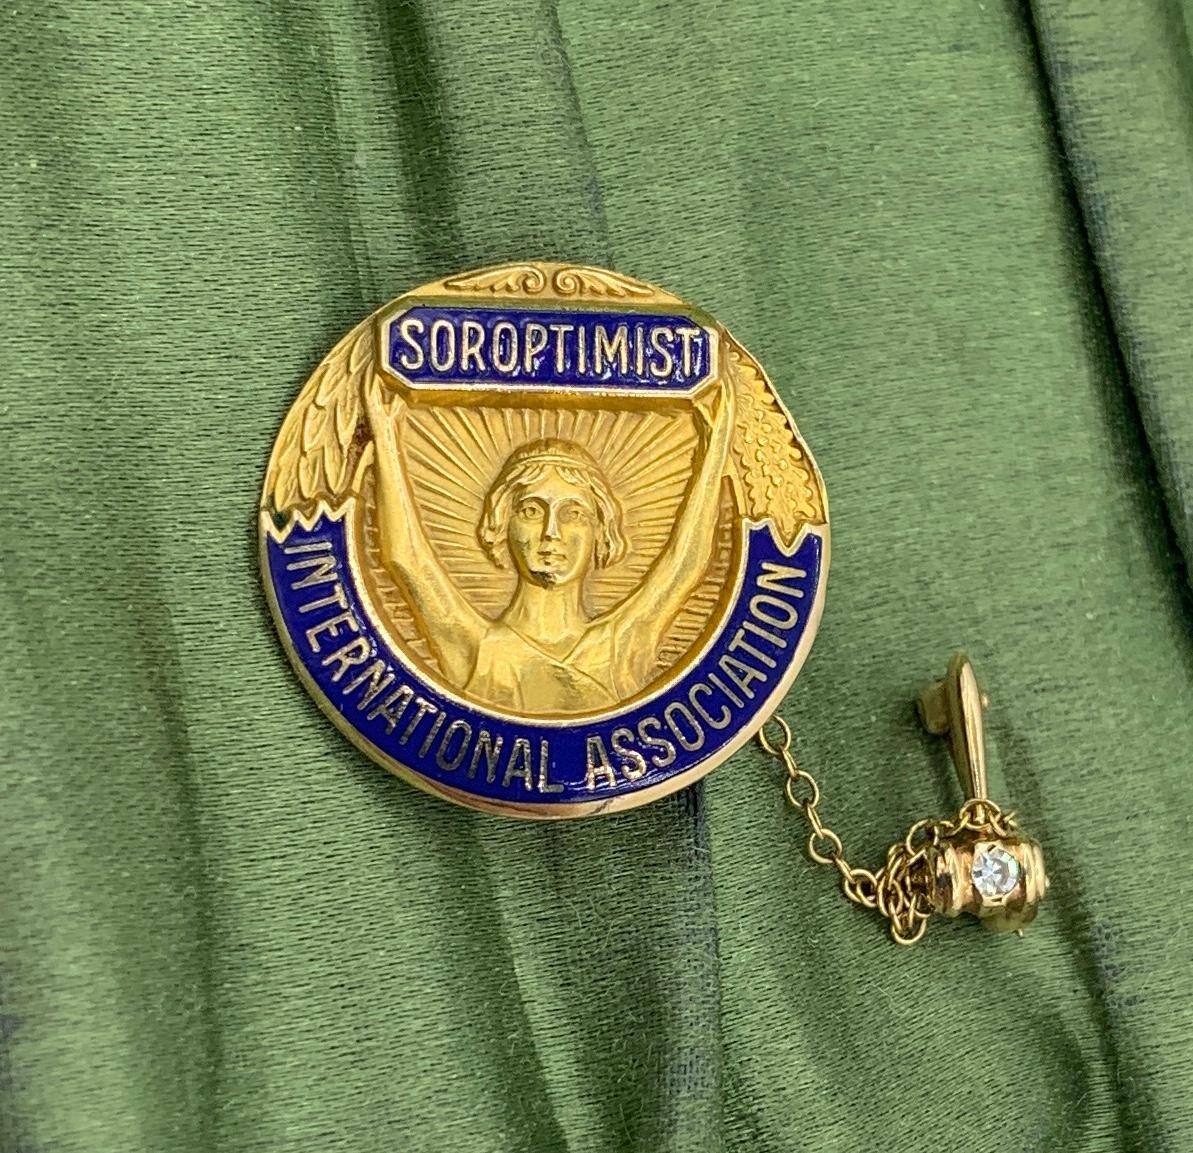 This is a wonderful antique Brooch and Pin from the Soroptomist International Society with an image of a woman with outstretched arms in front of a blazing sun. The brooch is a piece of early history from the Women's Movement!  The larger pin is